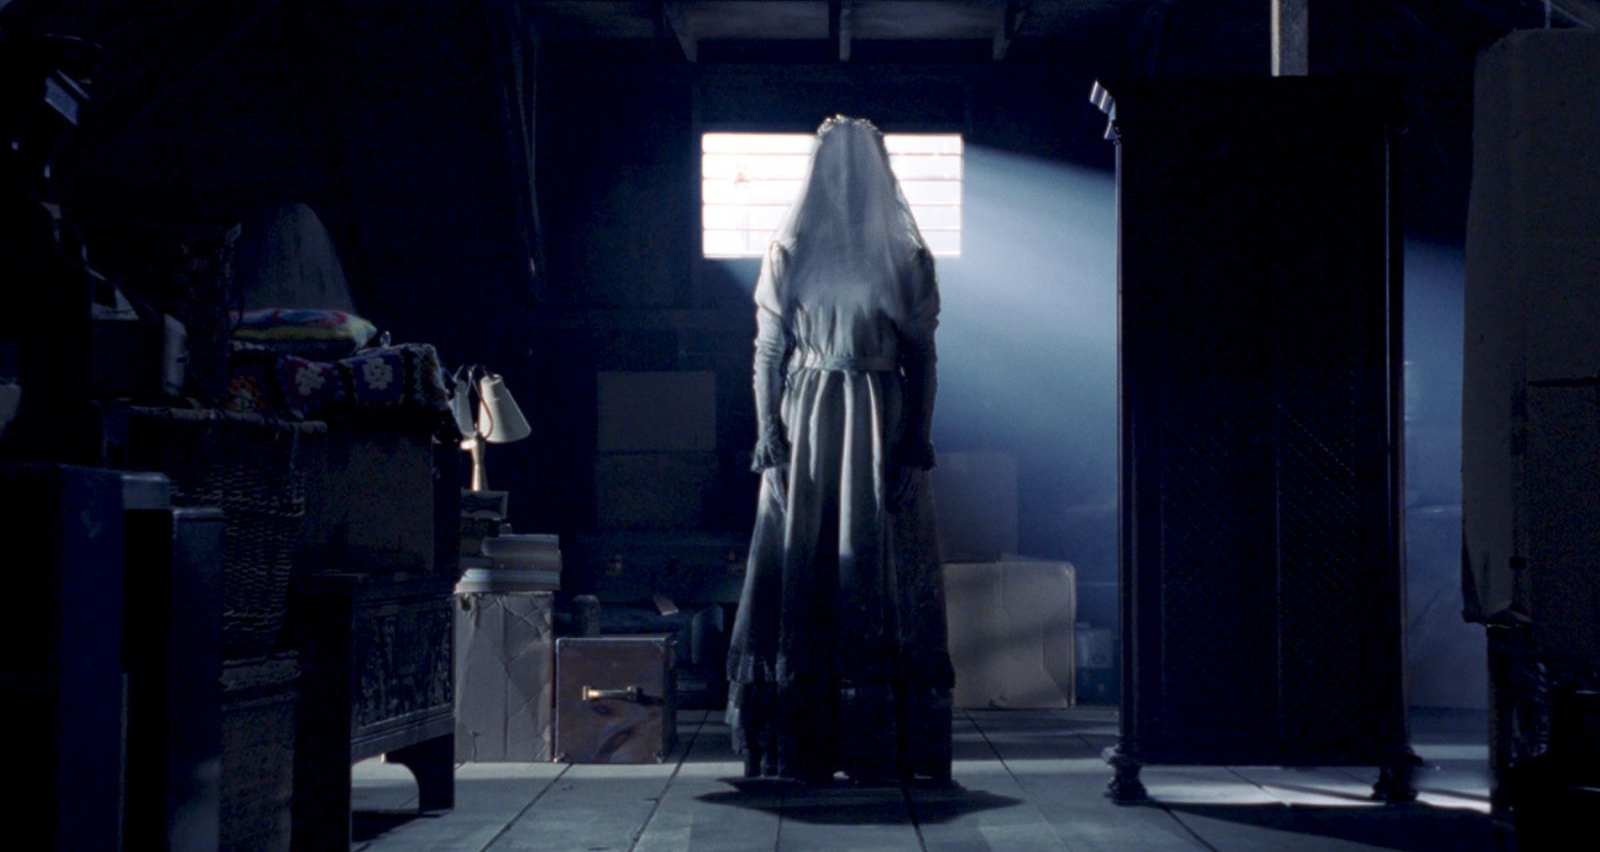 THE CURSE OF LA LLORONA Delivers the Same Old Jump Scares